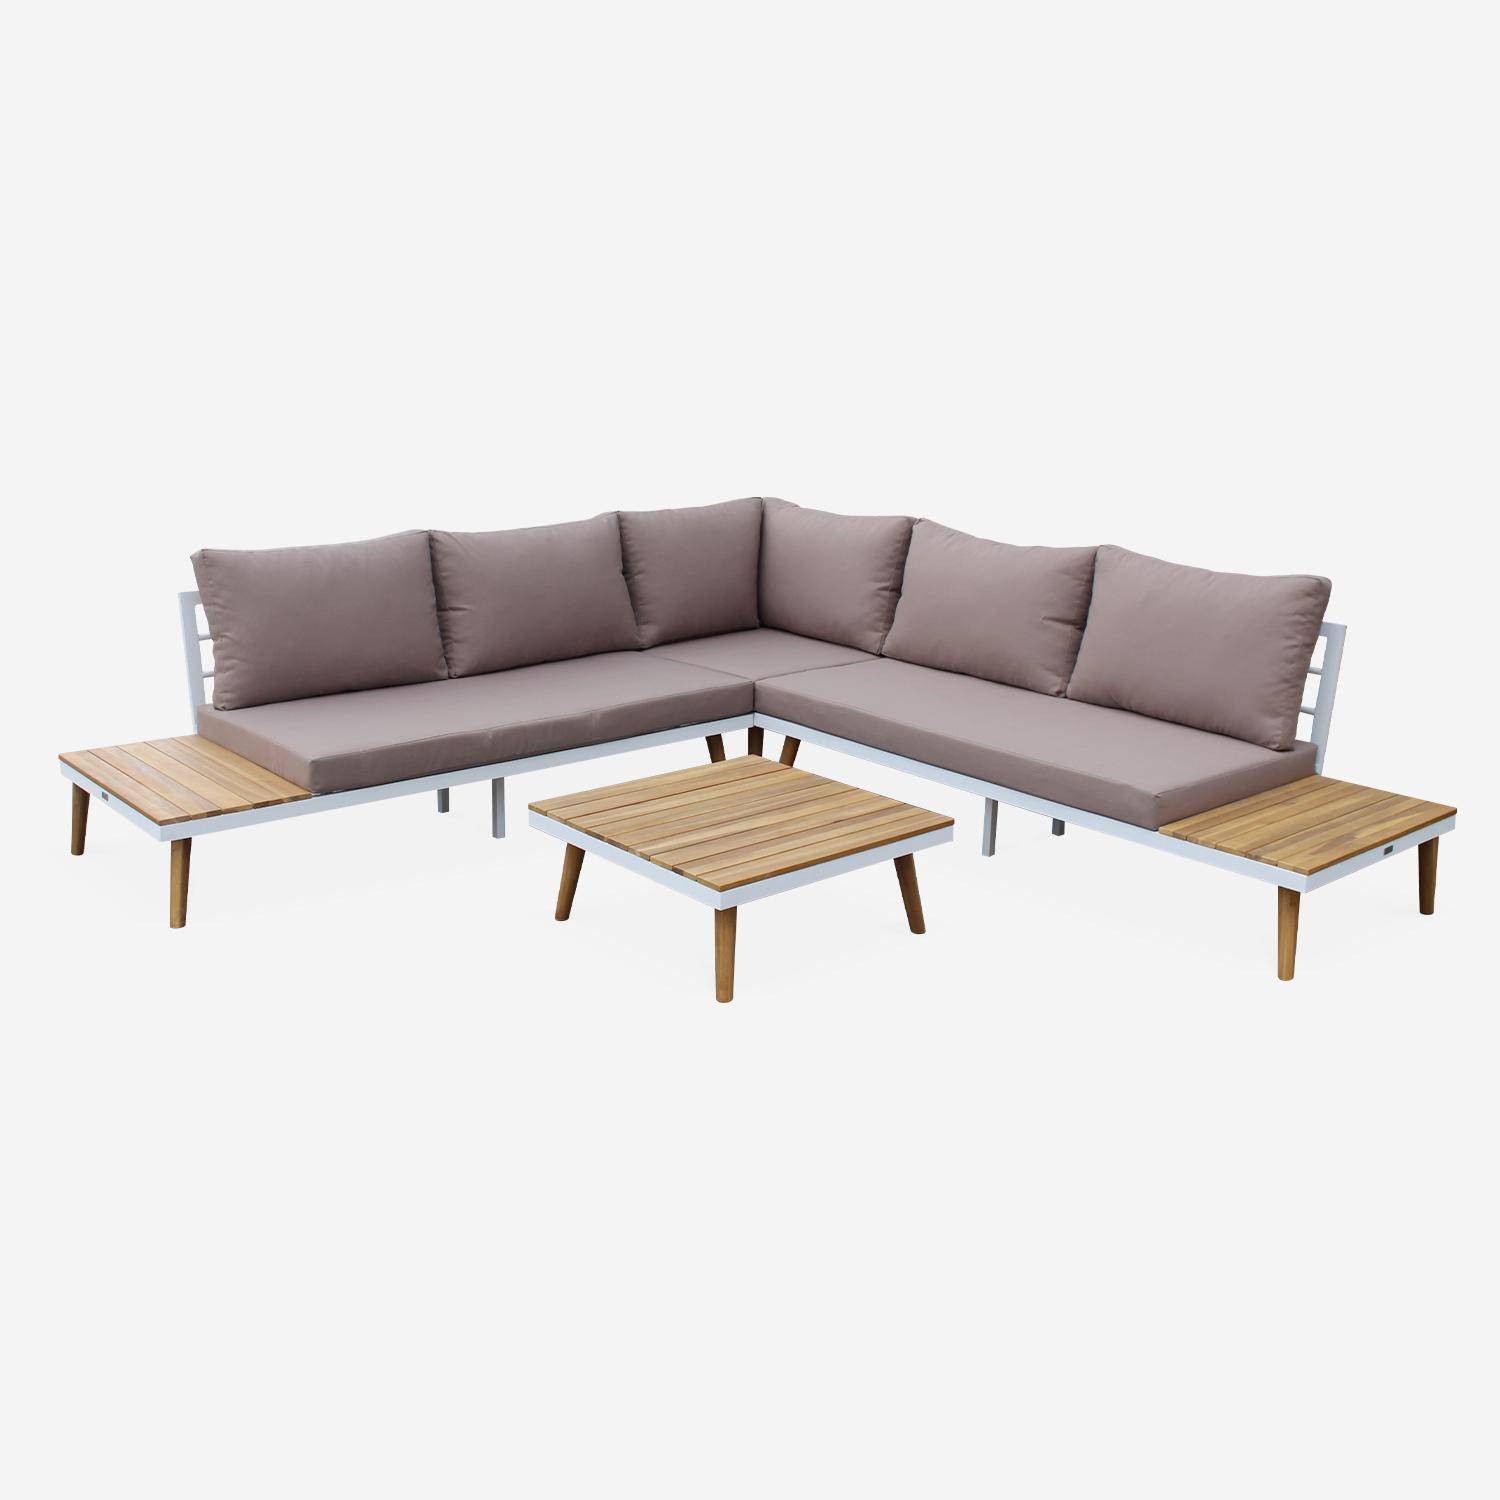 5-seater wooden outdoor sofa - cushions, corner sofa, acacia wood side tables and coffee table, aluminium frame, Scandinavian-style legs - Buenos Aires - Beige-Brown Photo2